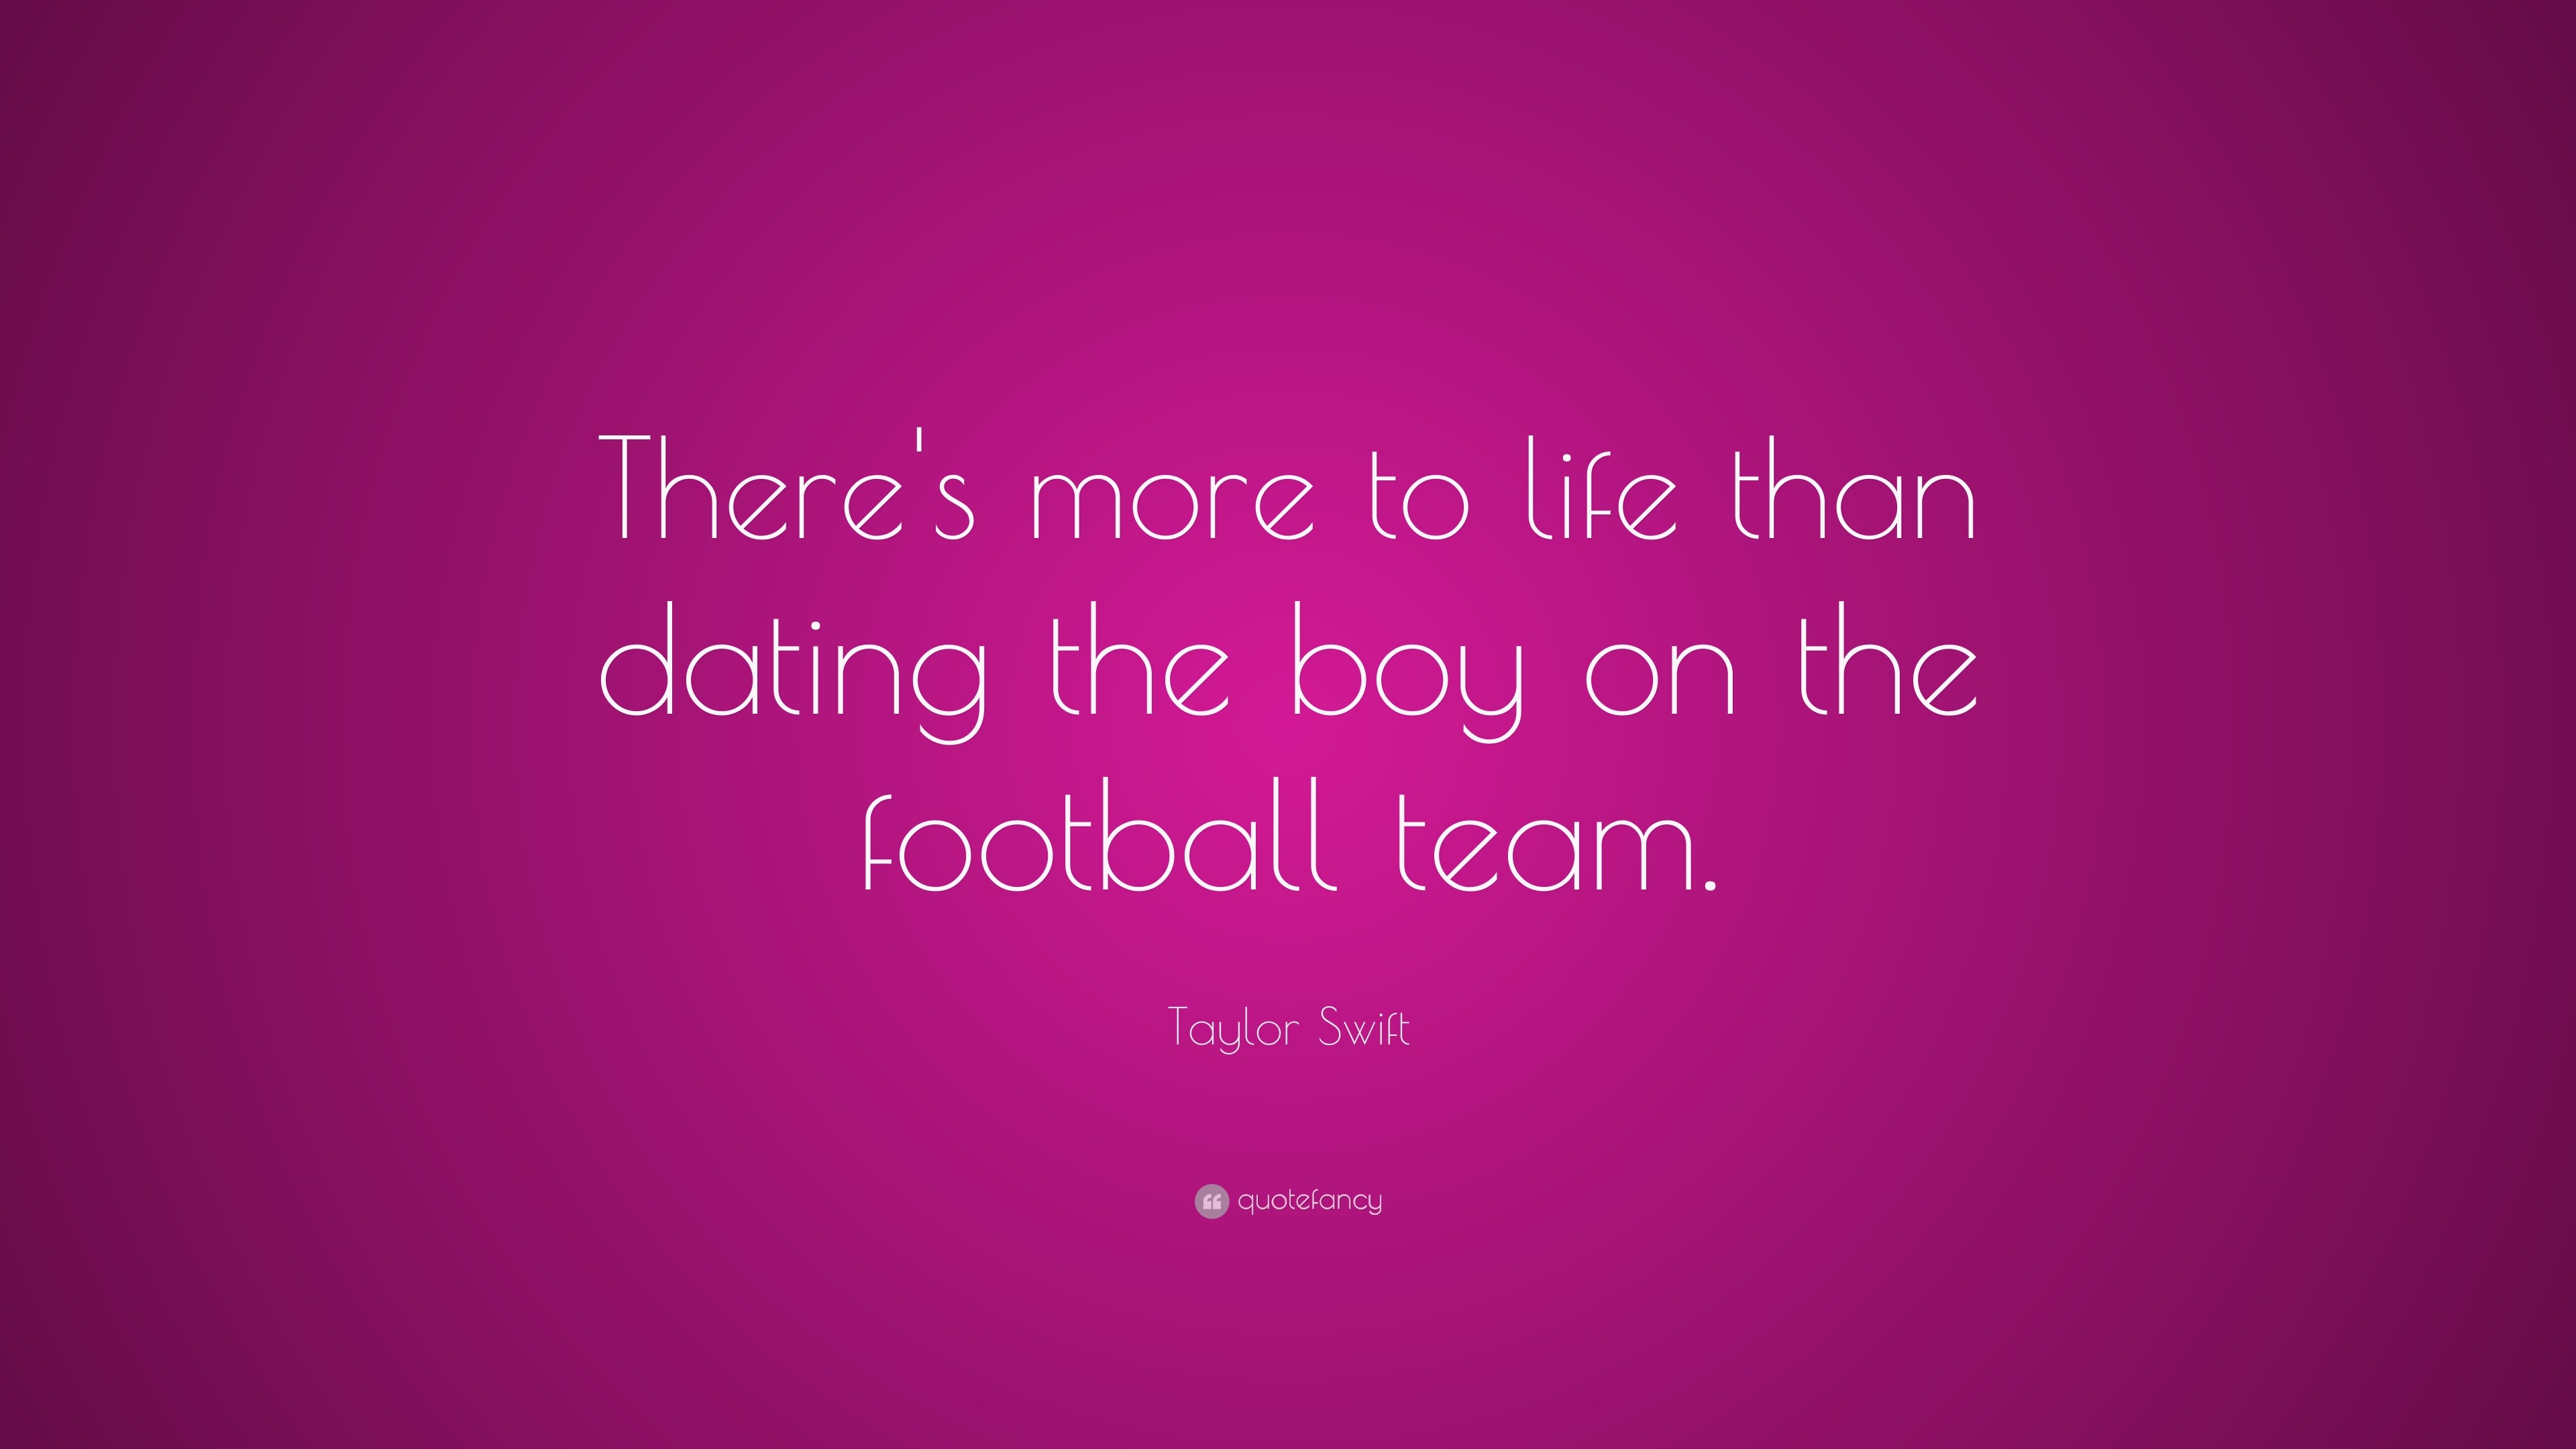 Taylor Swift Quote “There s more to life than dating the boy on the football